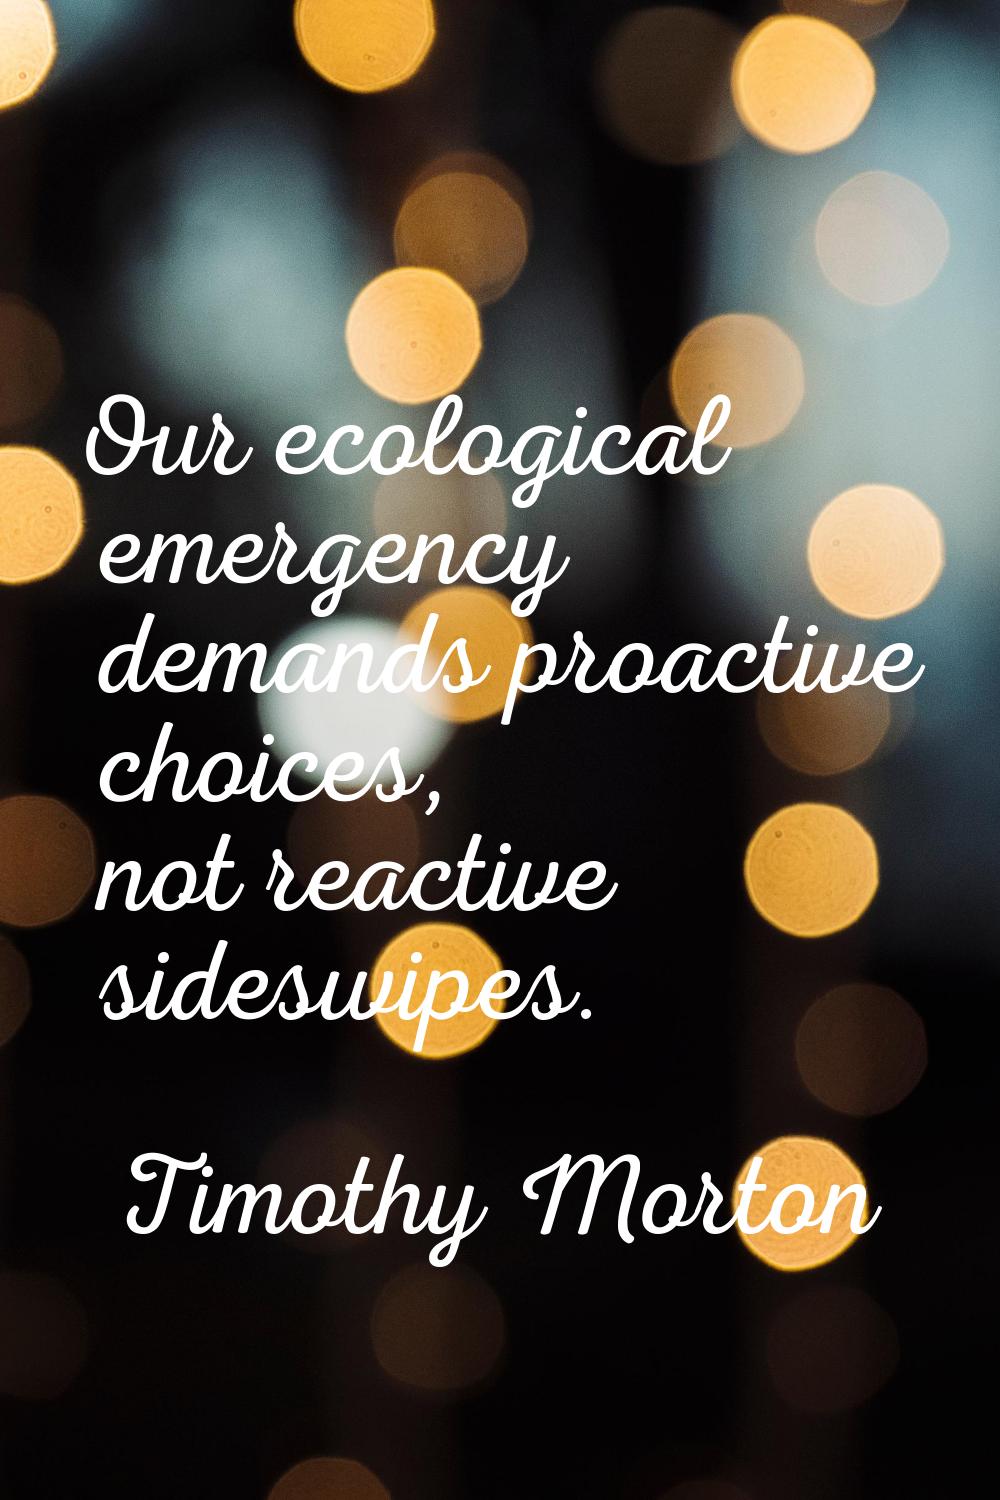 Our ecological emergency demands proactive choices, not reactive sideswipes.